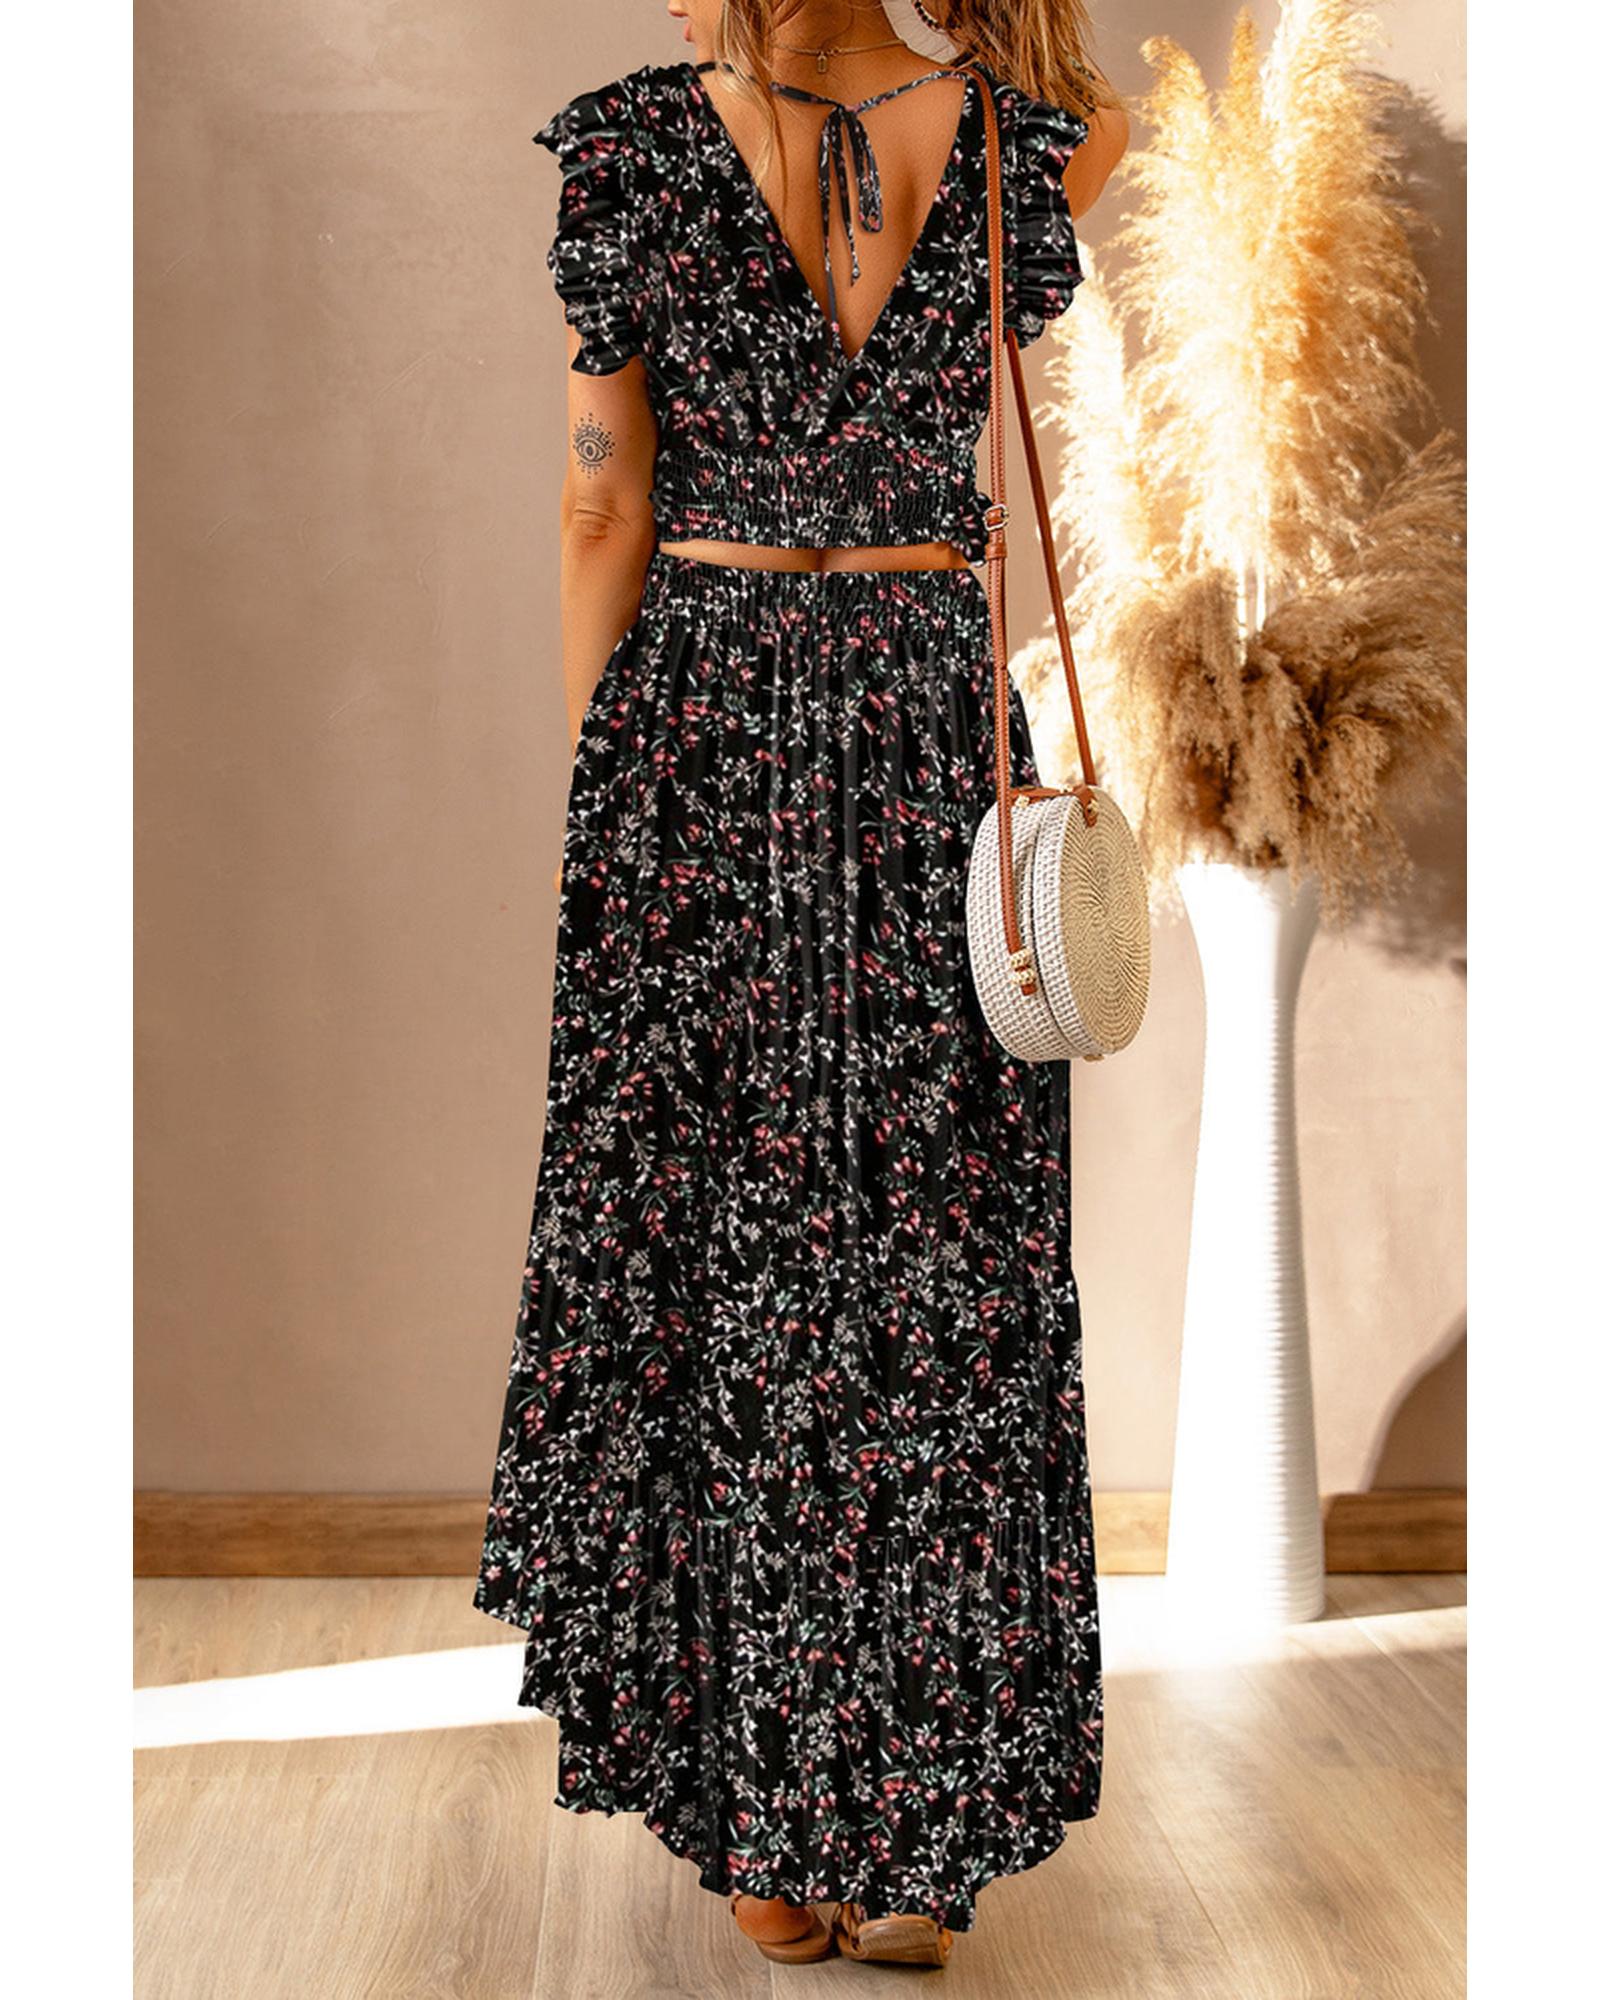 Floral Ruffled Crop Top and Maxi Skirt Set - M